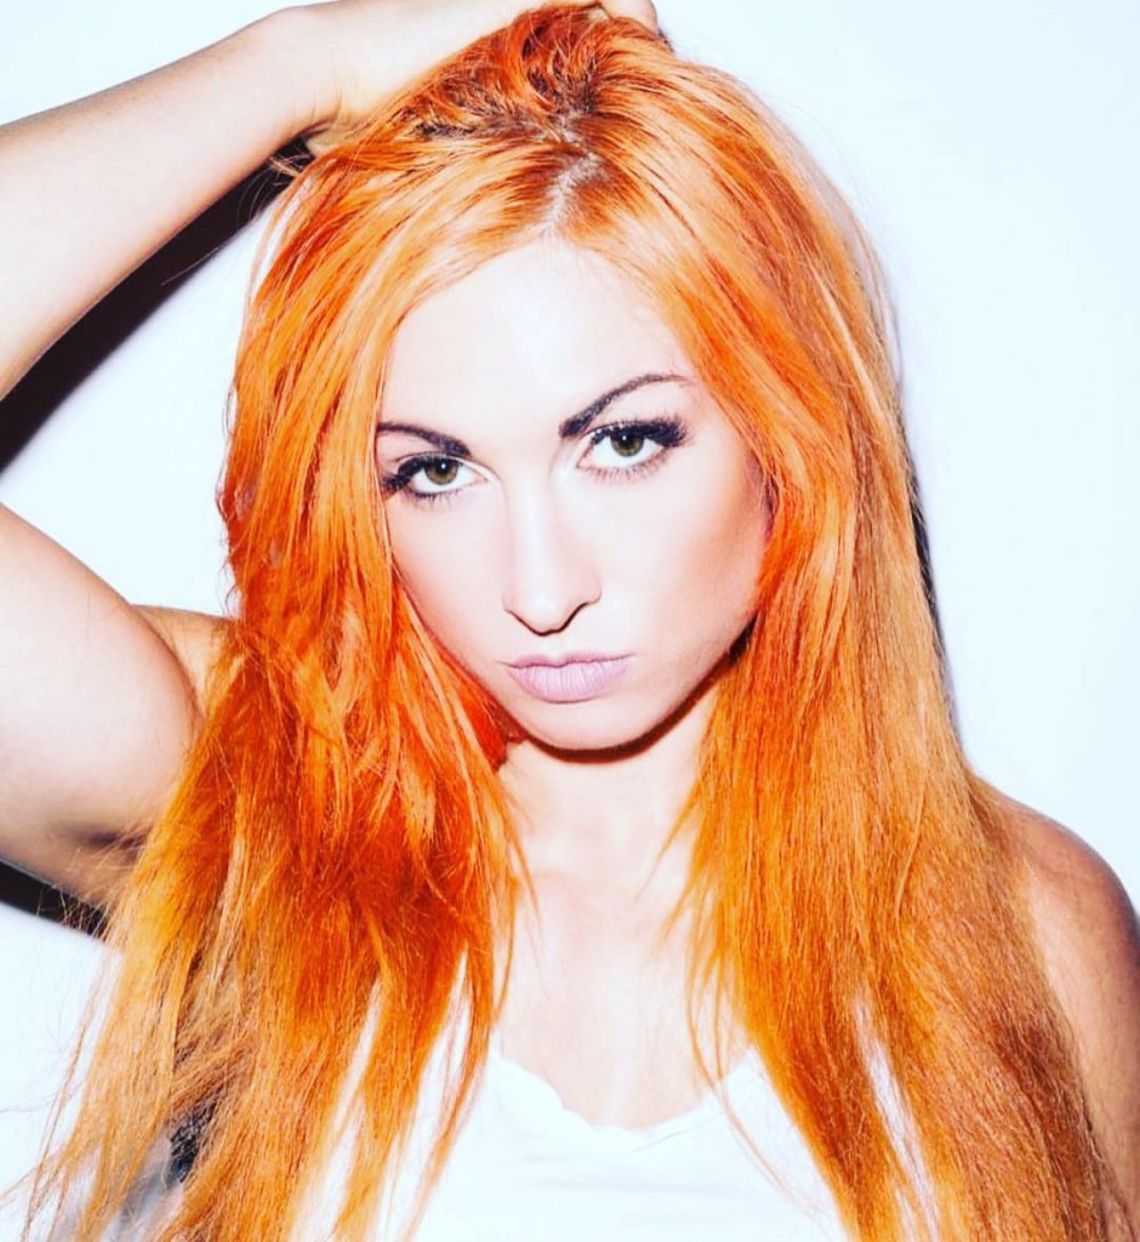 70+ Hot And Sexy Pictures of Becky Lynch – WWE Diva Will Sizzle You Up 28